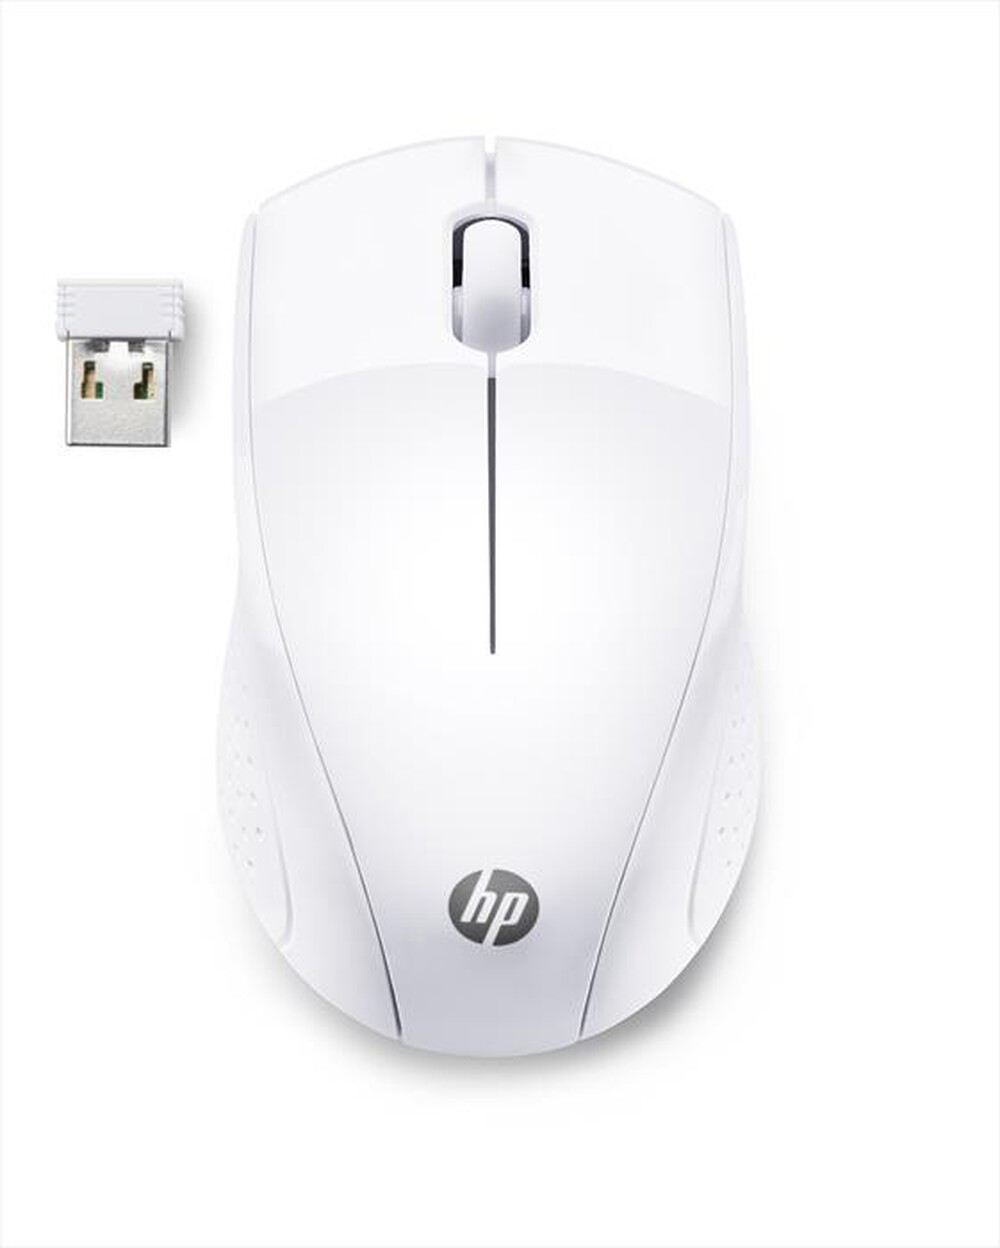 "HP - WIRELESS MOUSE 220-White"